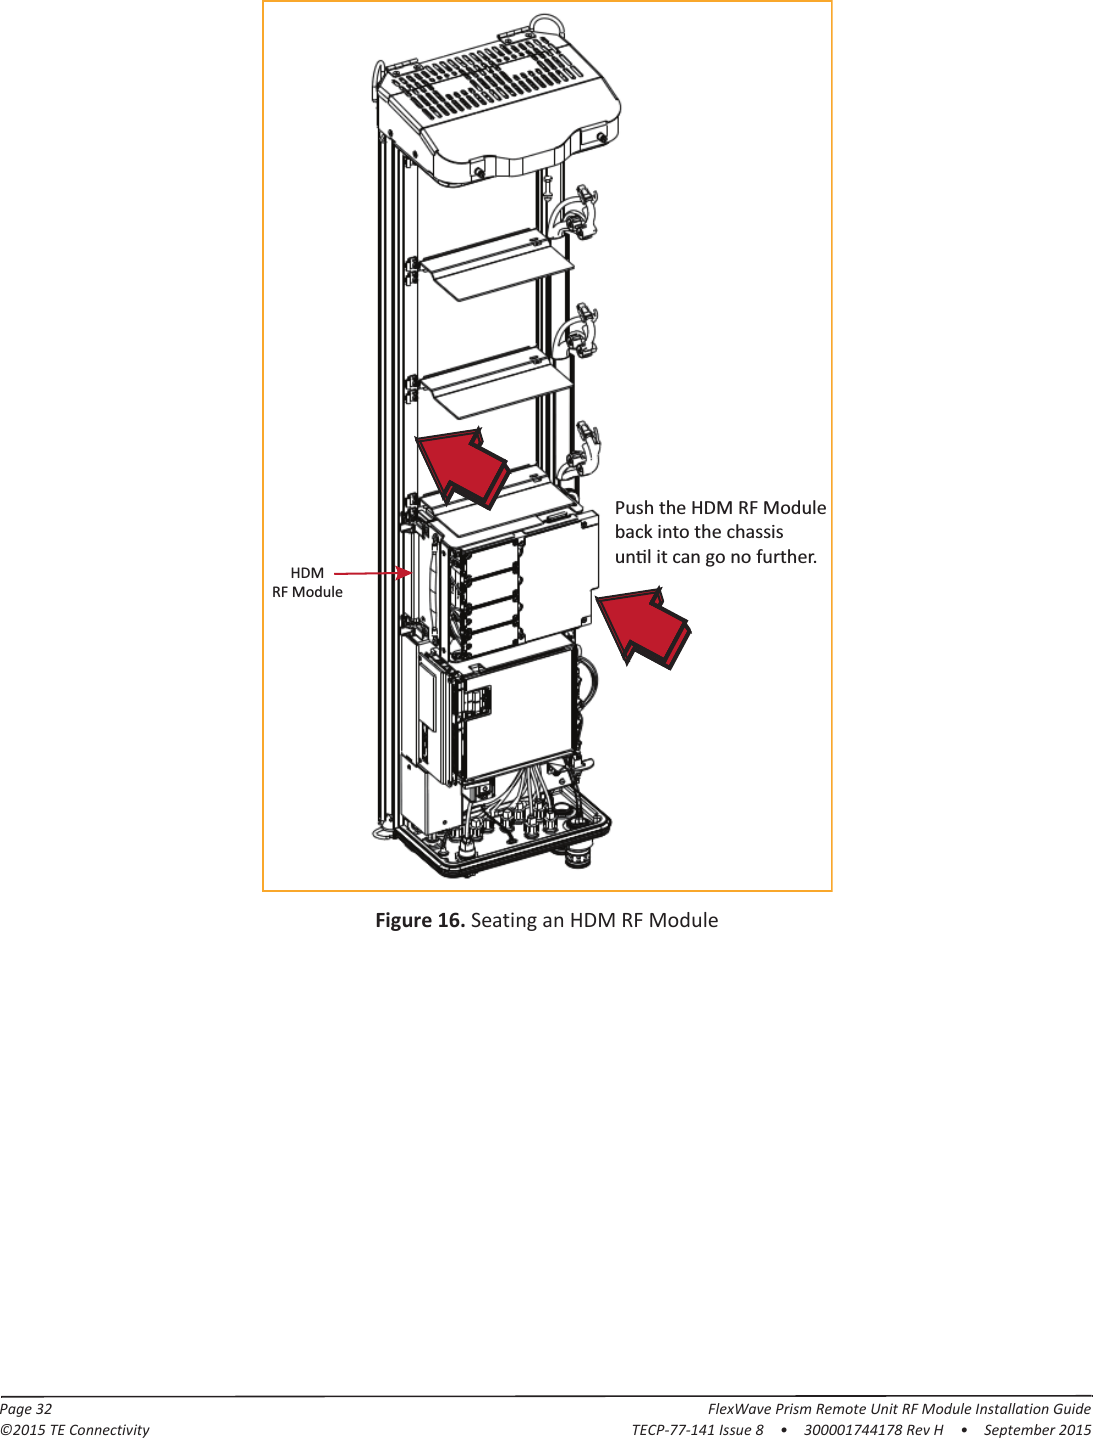 Page 32 FlexWave Prism Remote Unit RF Module Installation Guide©2015 TE Connectivity TECP-77-141 Issue 8  •  300001744178 Rev H  •  September 2015Figure 16. Seating an HDM RF ModulePush the HDM RF Moduleback into the chassisunƟl it can go no further.HDMRF Module